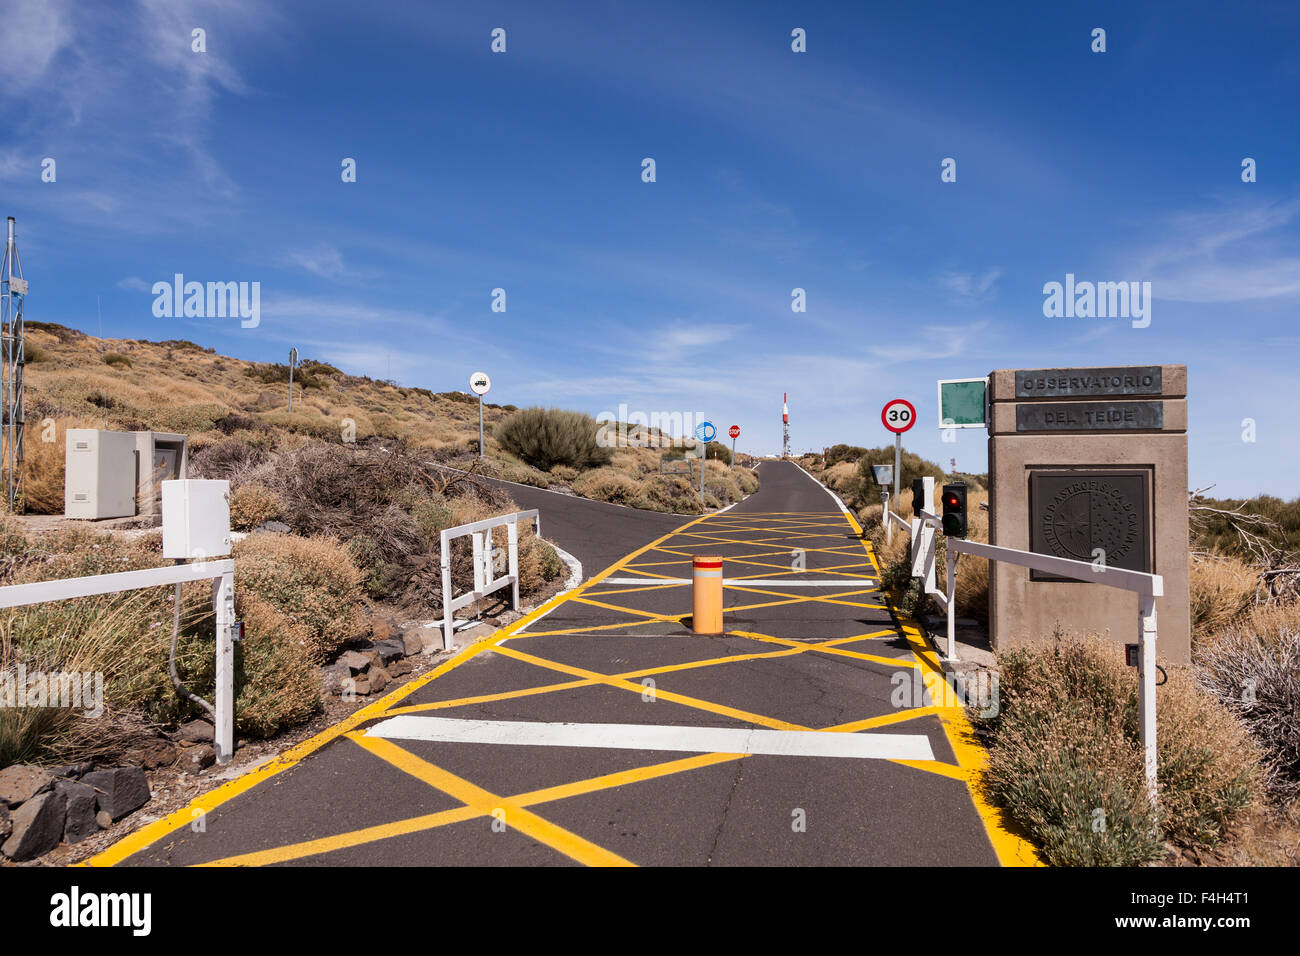 Entrance to the Canarian Astrophysics Institute at Izana on Mount teide, tenerife, Canary Islands, Spain. Stock Photo